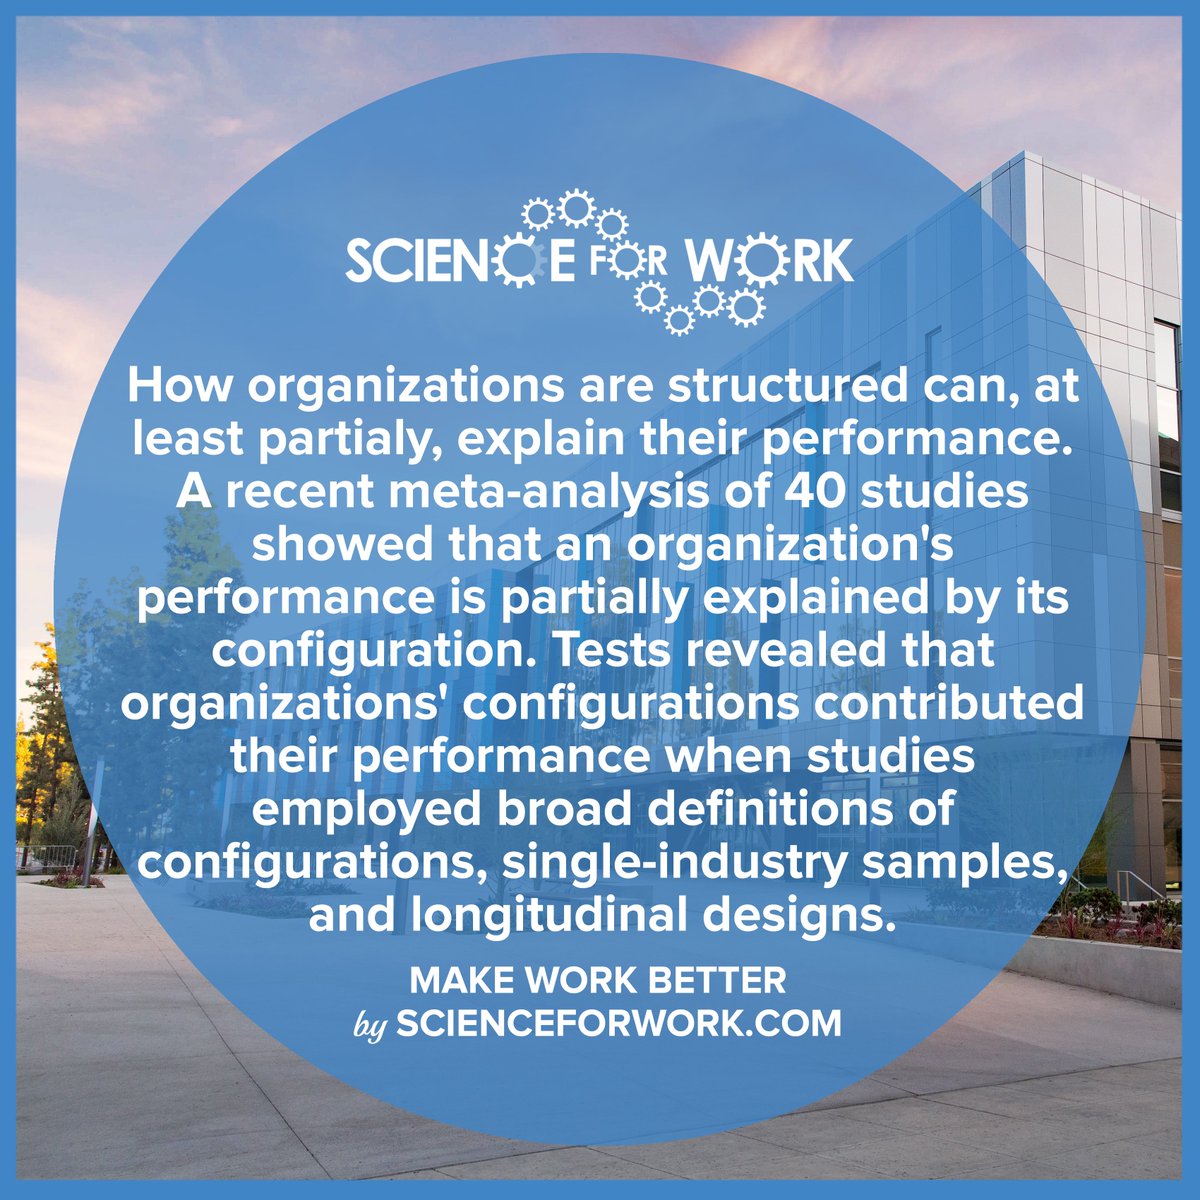 #MakeWorkBetter   with #scienceforwork ⚗😁🔍
Produced by @A_J_Halliday
 
Take a peek at it here:
journals.aom.org/doi/abs/10.546…

#work #structure #performance #profits #customersatisfaction #managment #flat #hierarchy #EBM #EBP #Management #MGMT #evidencebasedmanagement #orgstructure